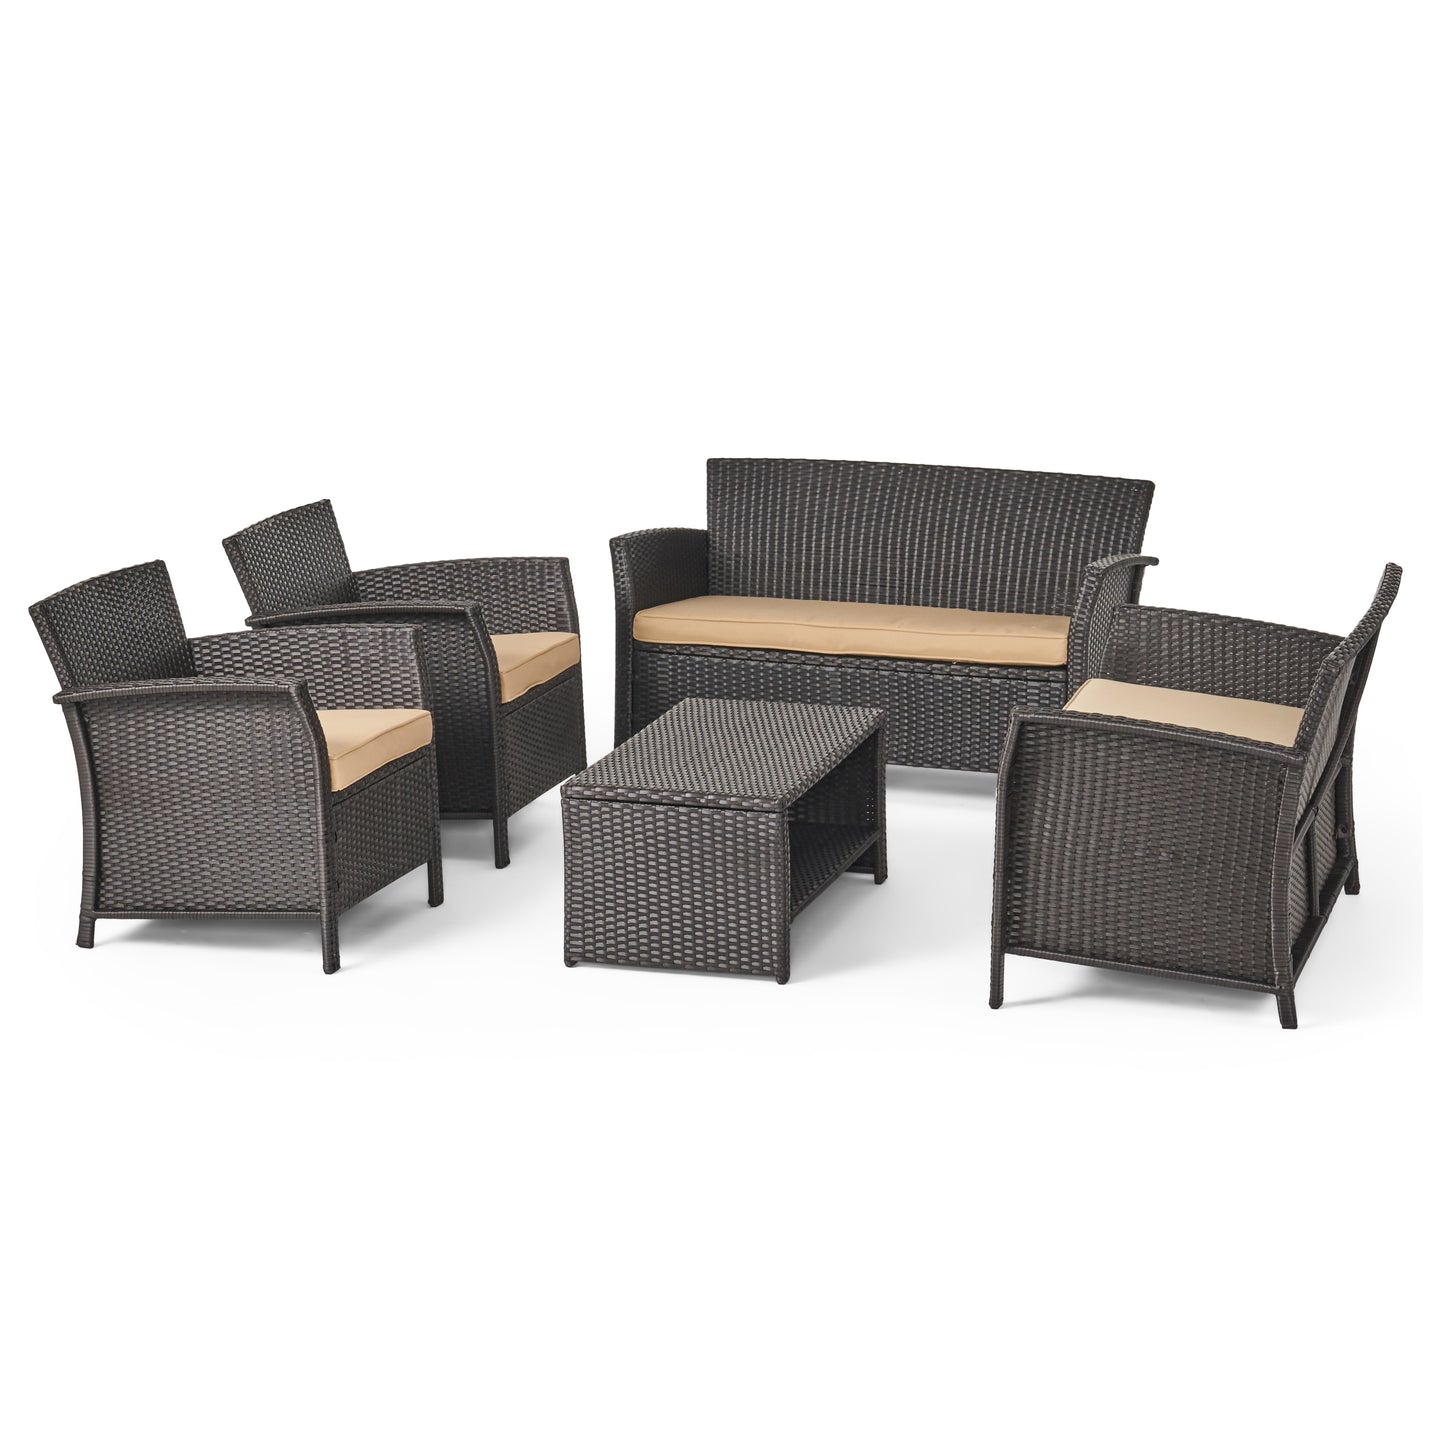 Lucia Outdoor 6-Seater Wicker Conversation Set with Coffee Table